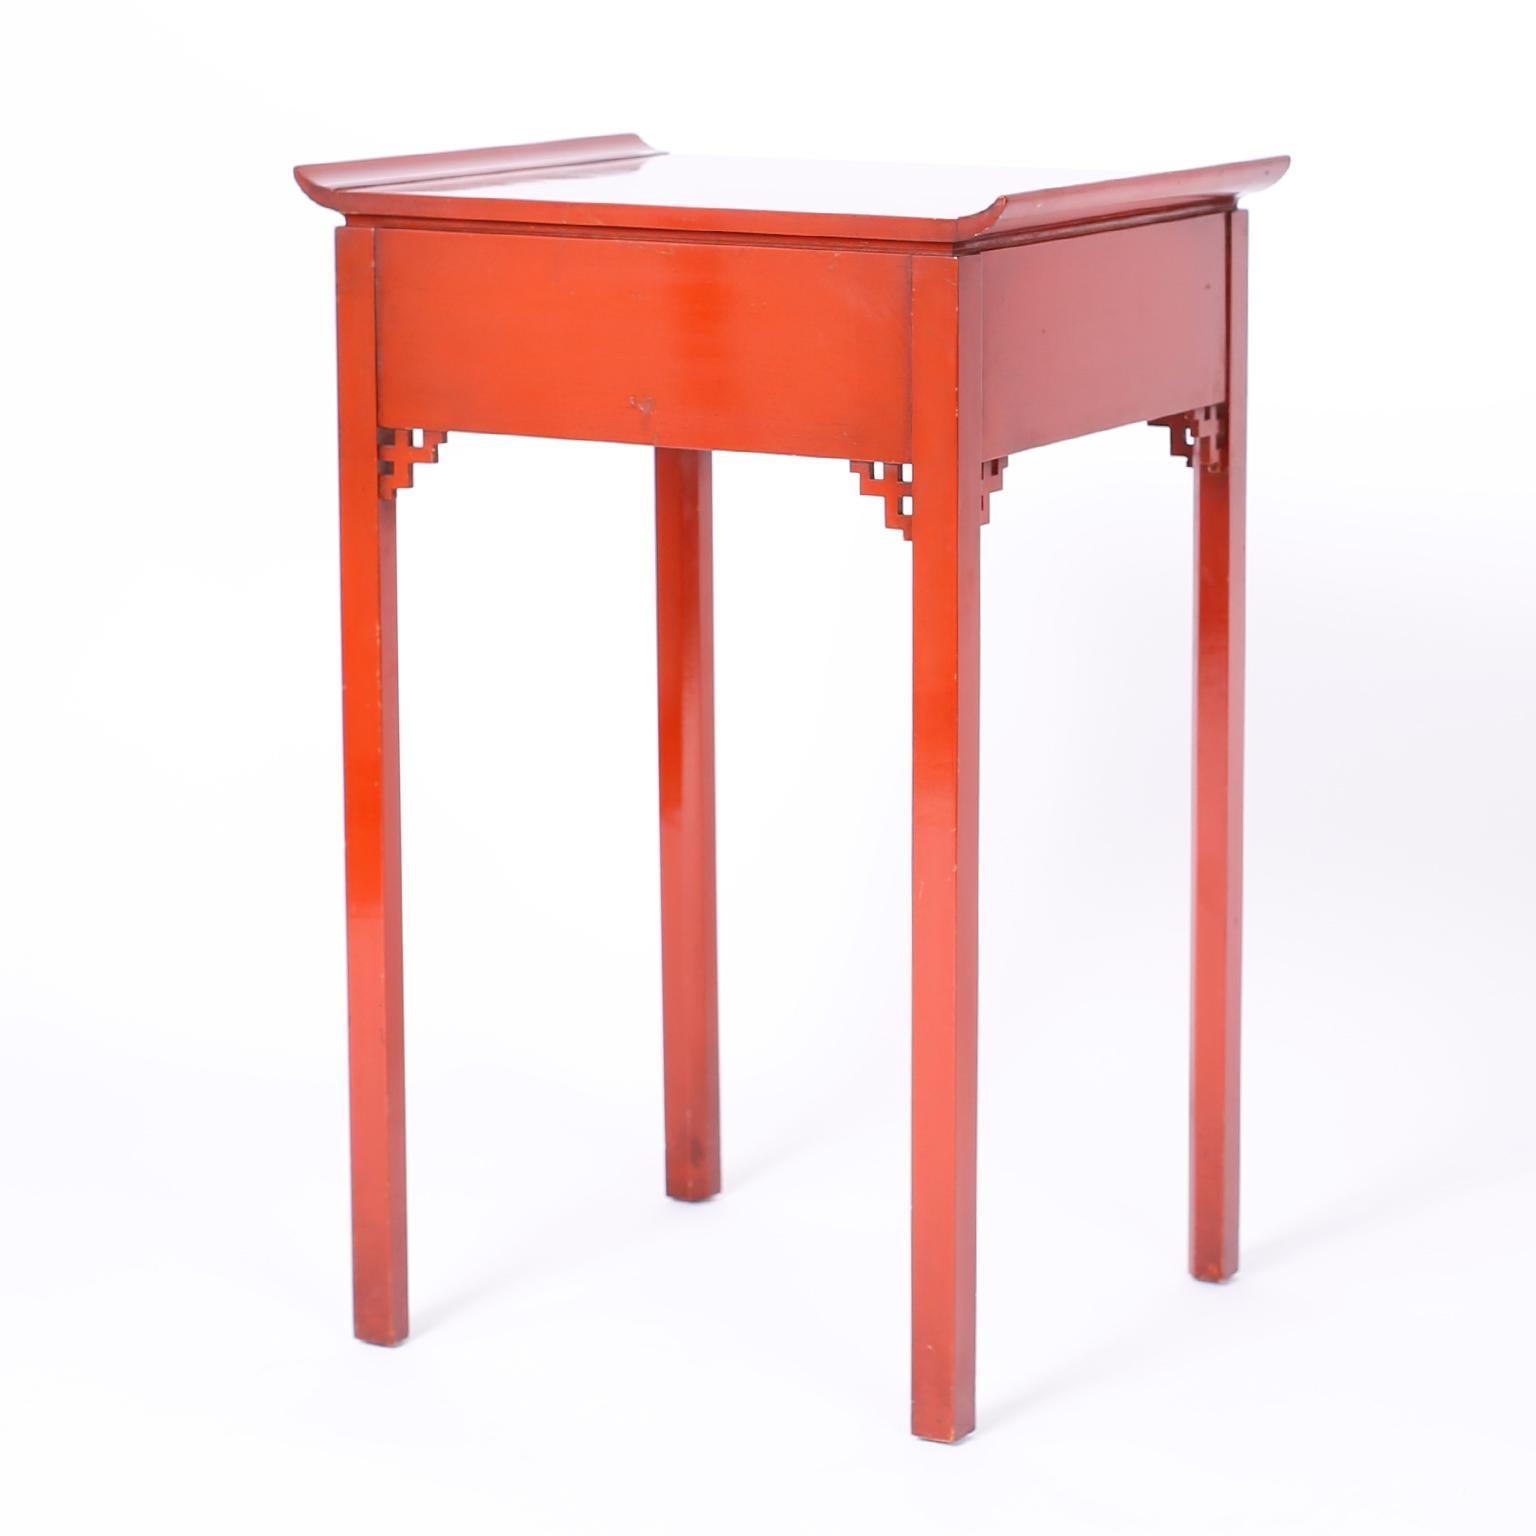 American Pair of Red Pagoda Stands or End Tables